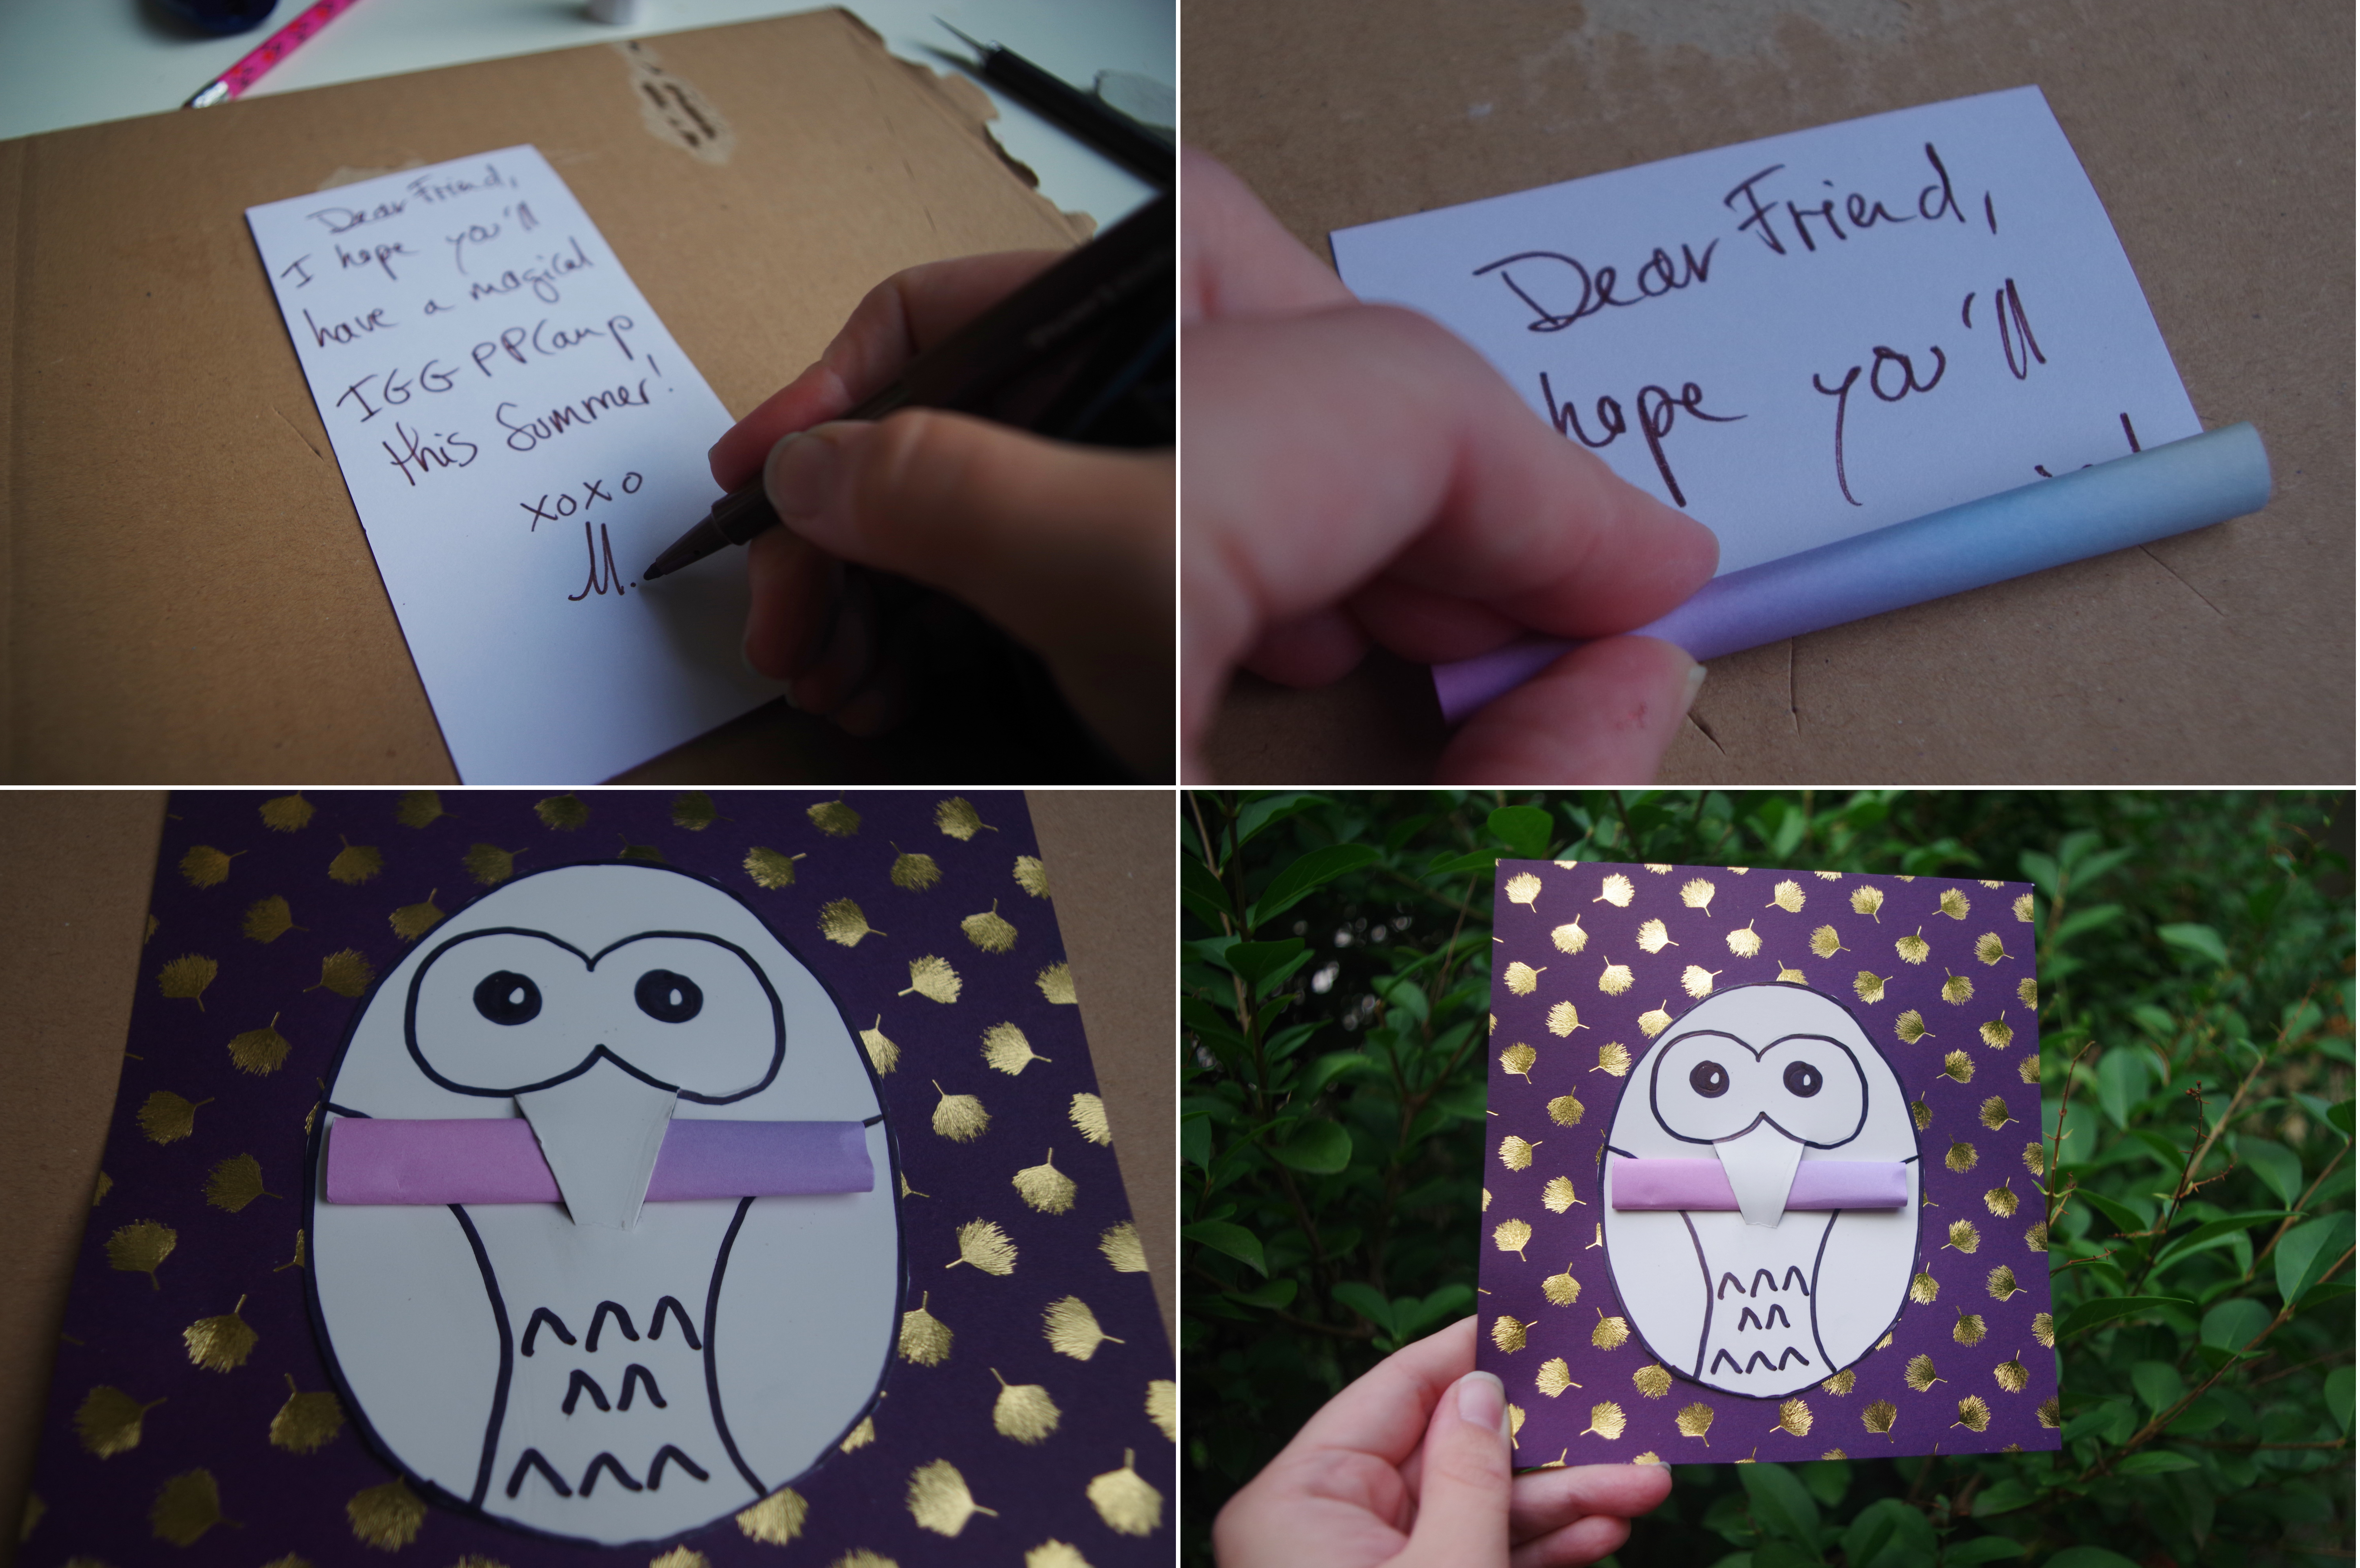 A small message is written on a slip of paper, which is then folded up and slid into the owl's beak. The message reads: Dear friend, I hope you have a magical IGGPPCamp this summer! xoxo, M.